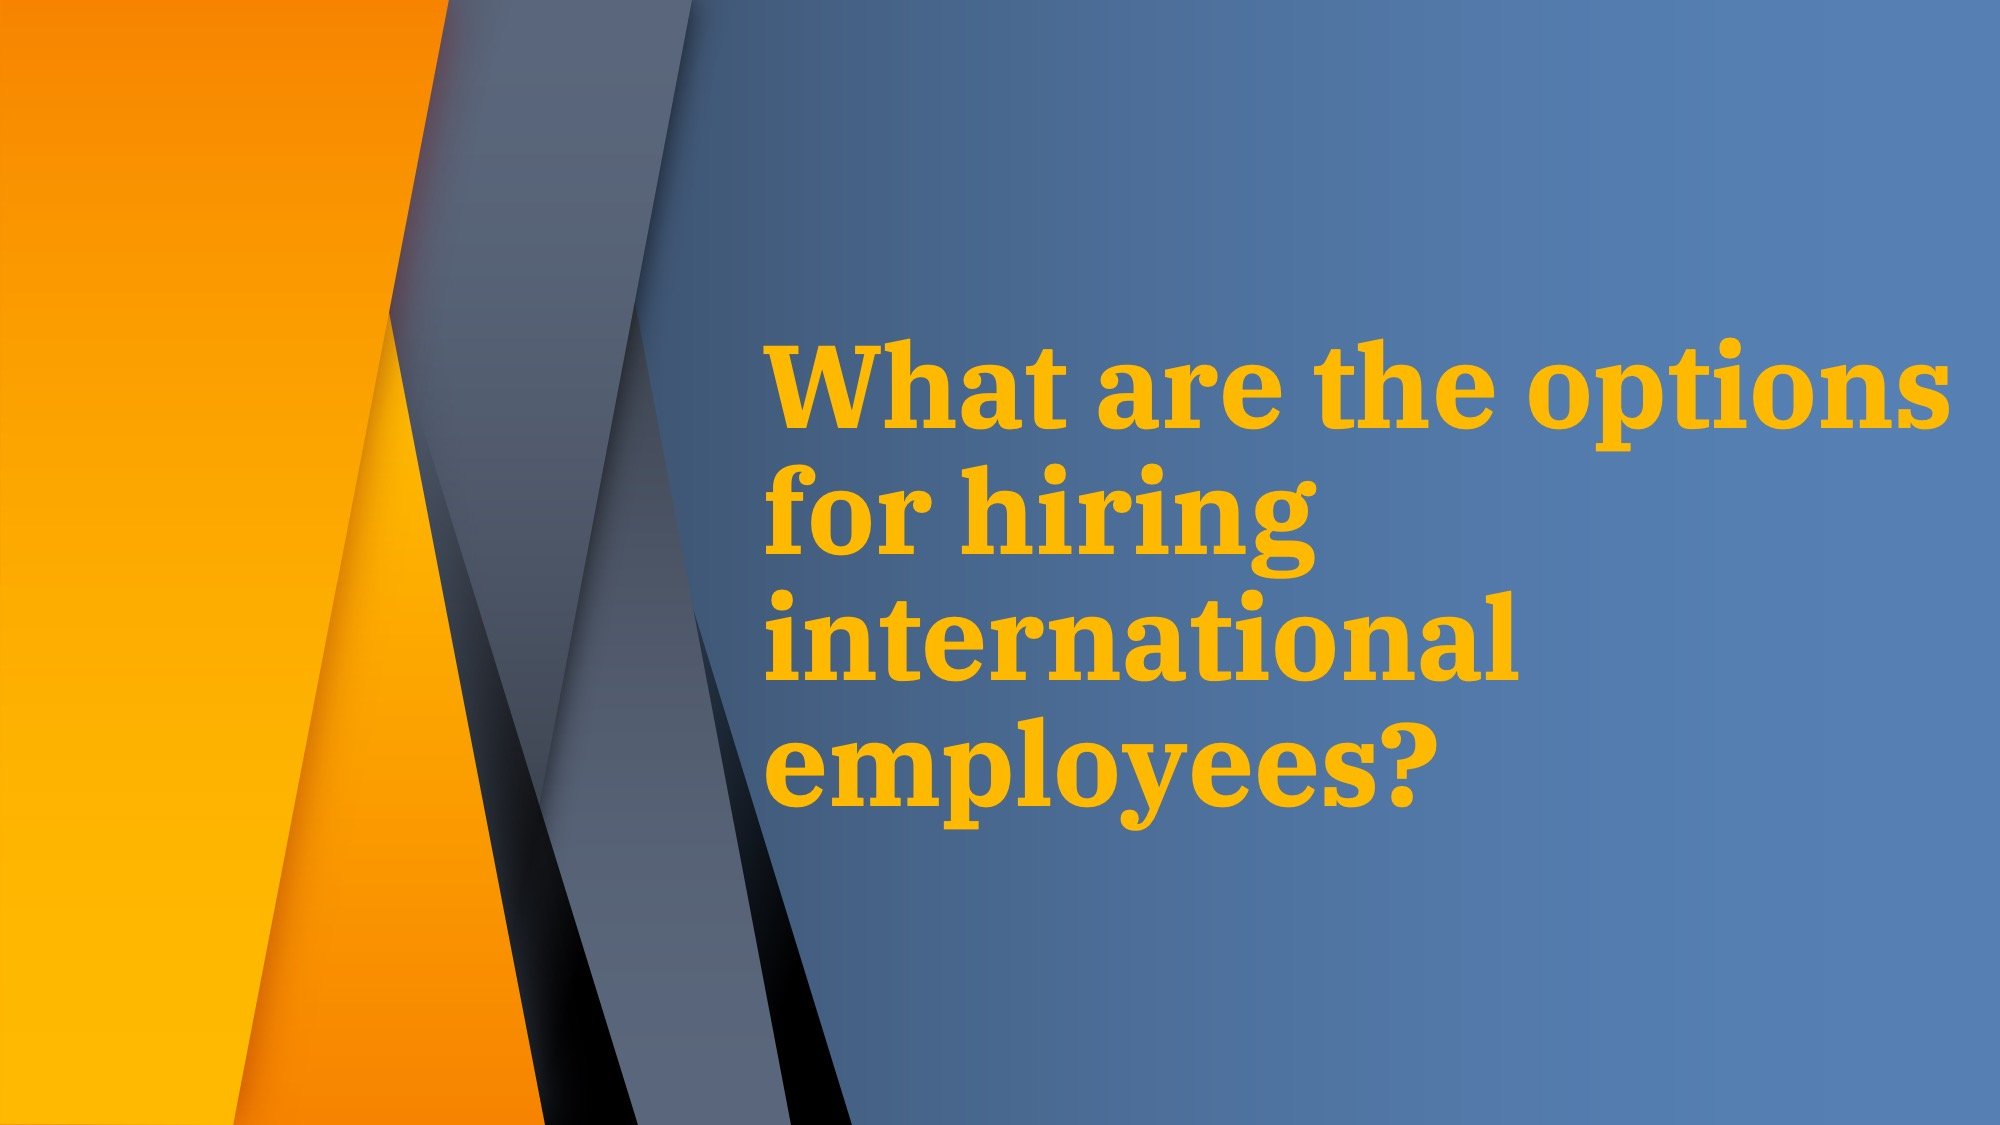 What are the options for hiring international employees?